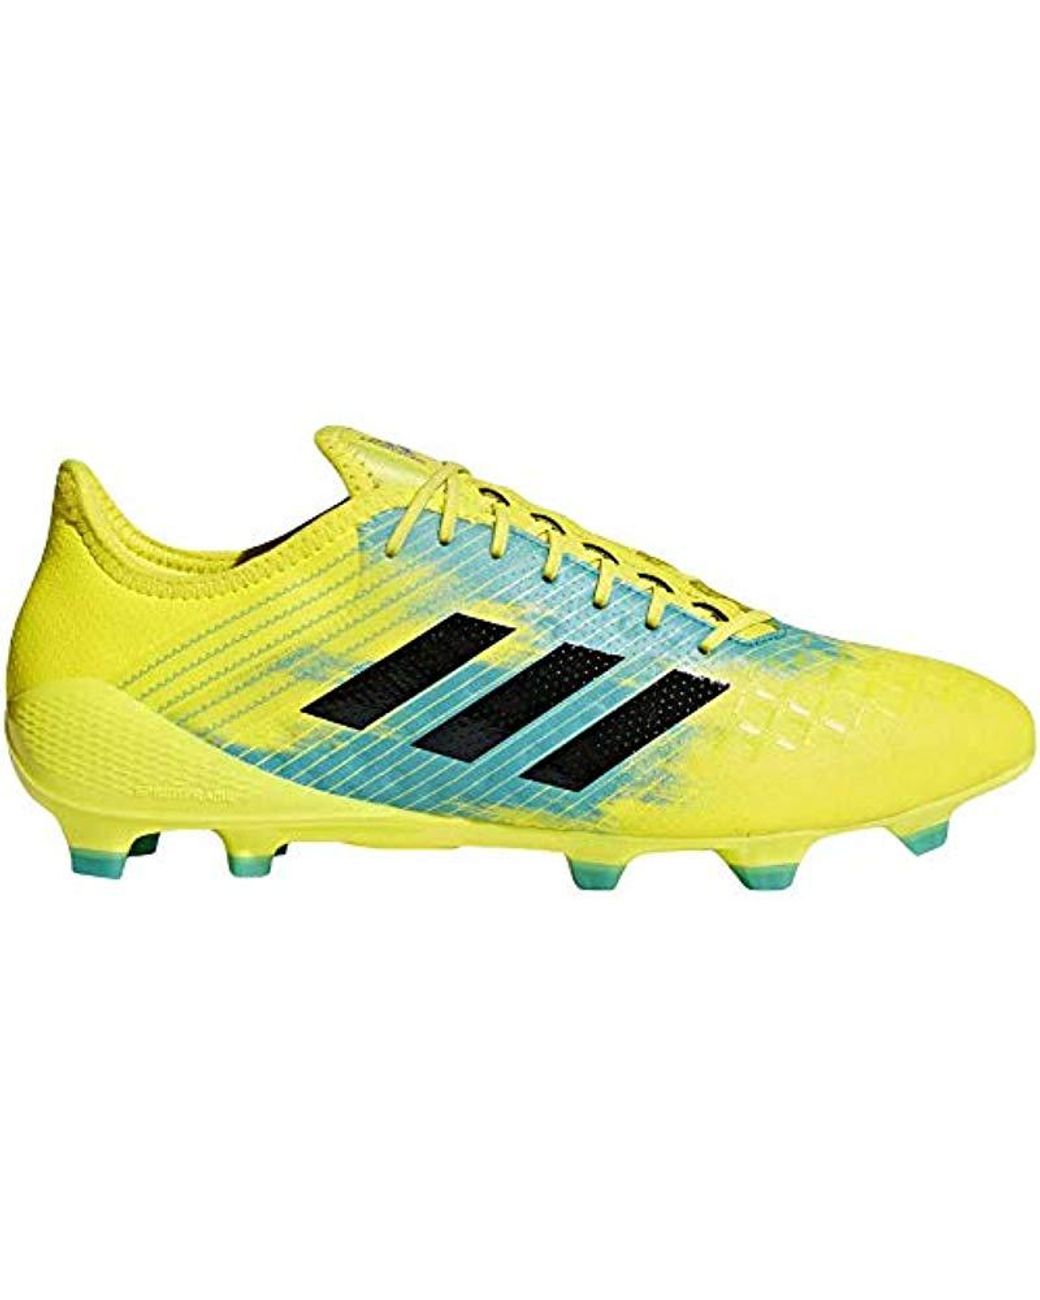 Adidas Lace Predator Malice Control Fg Rugby Shoes In Yellow For